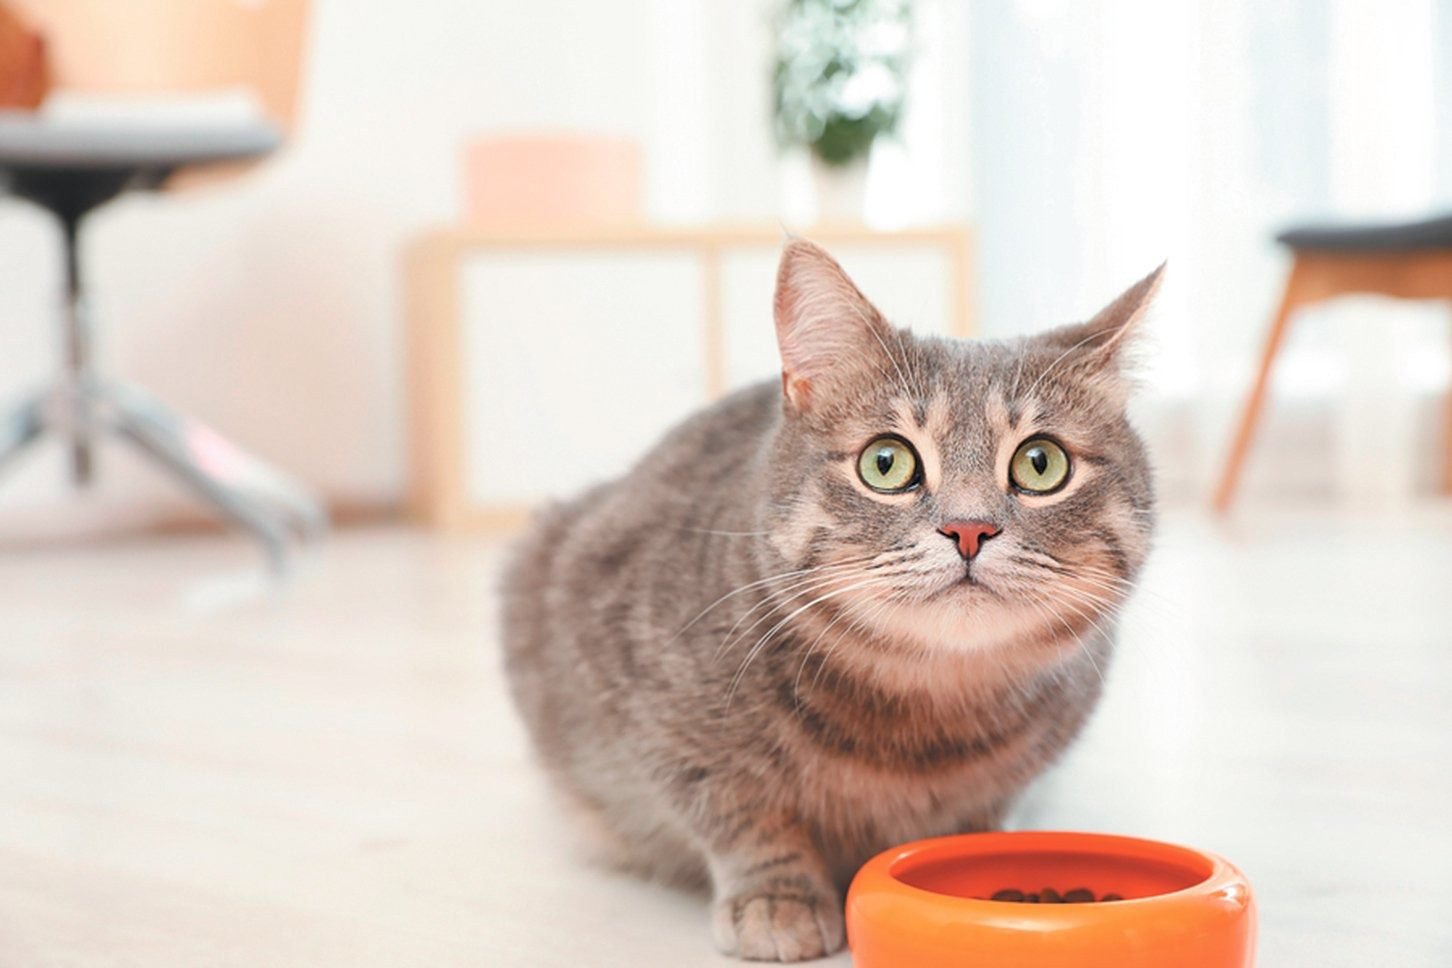 Cats who are always hungry and losing weight may have ailments such as cancer